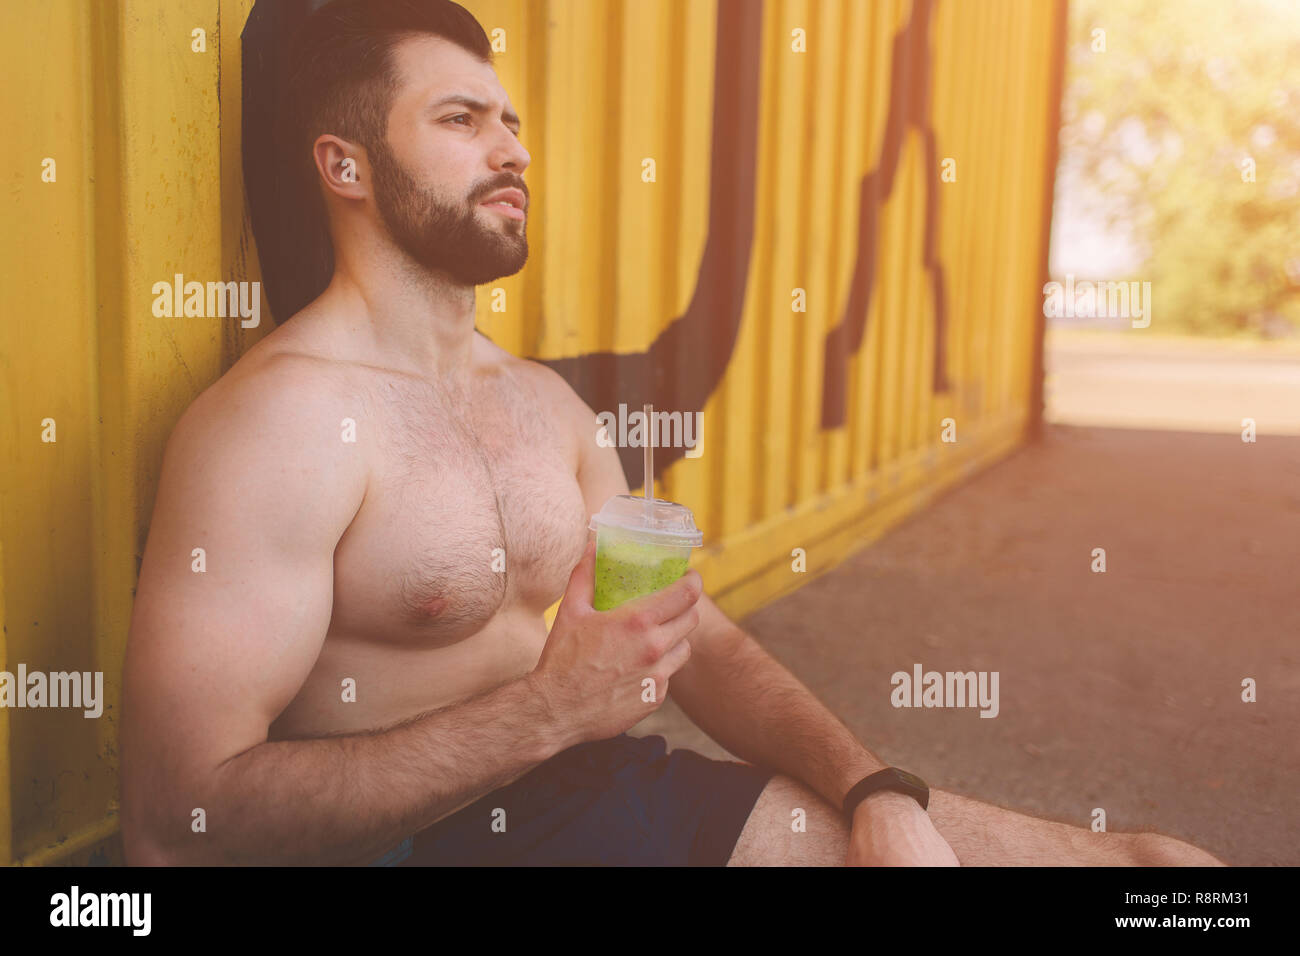 handsome young muscular man drinks Green detox smoothie cup. Picture of a young athletic man after training. Stock Photo